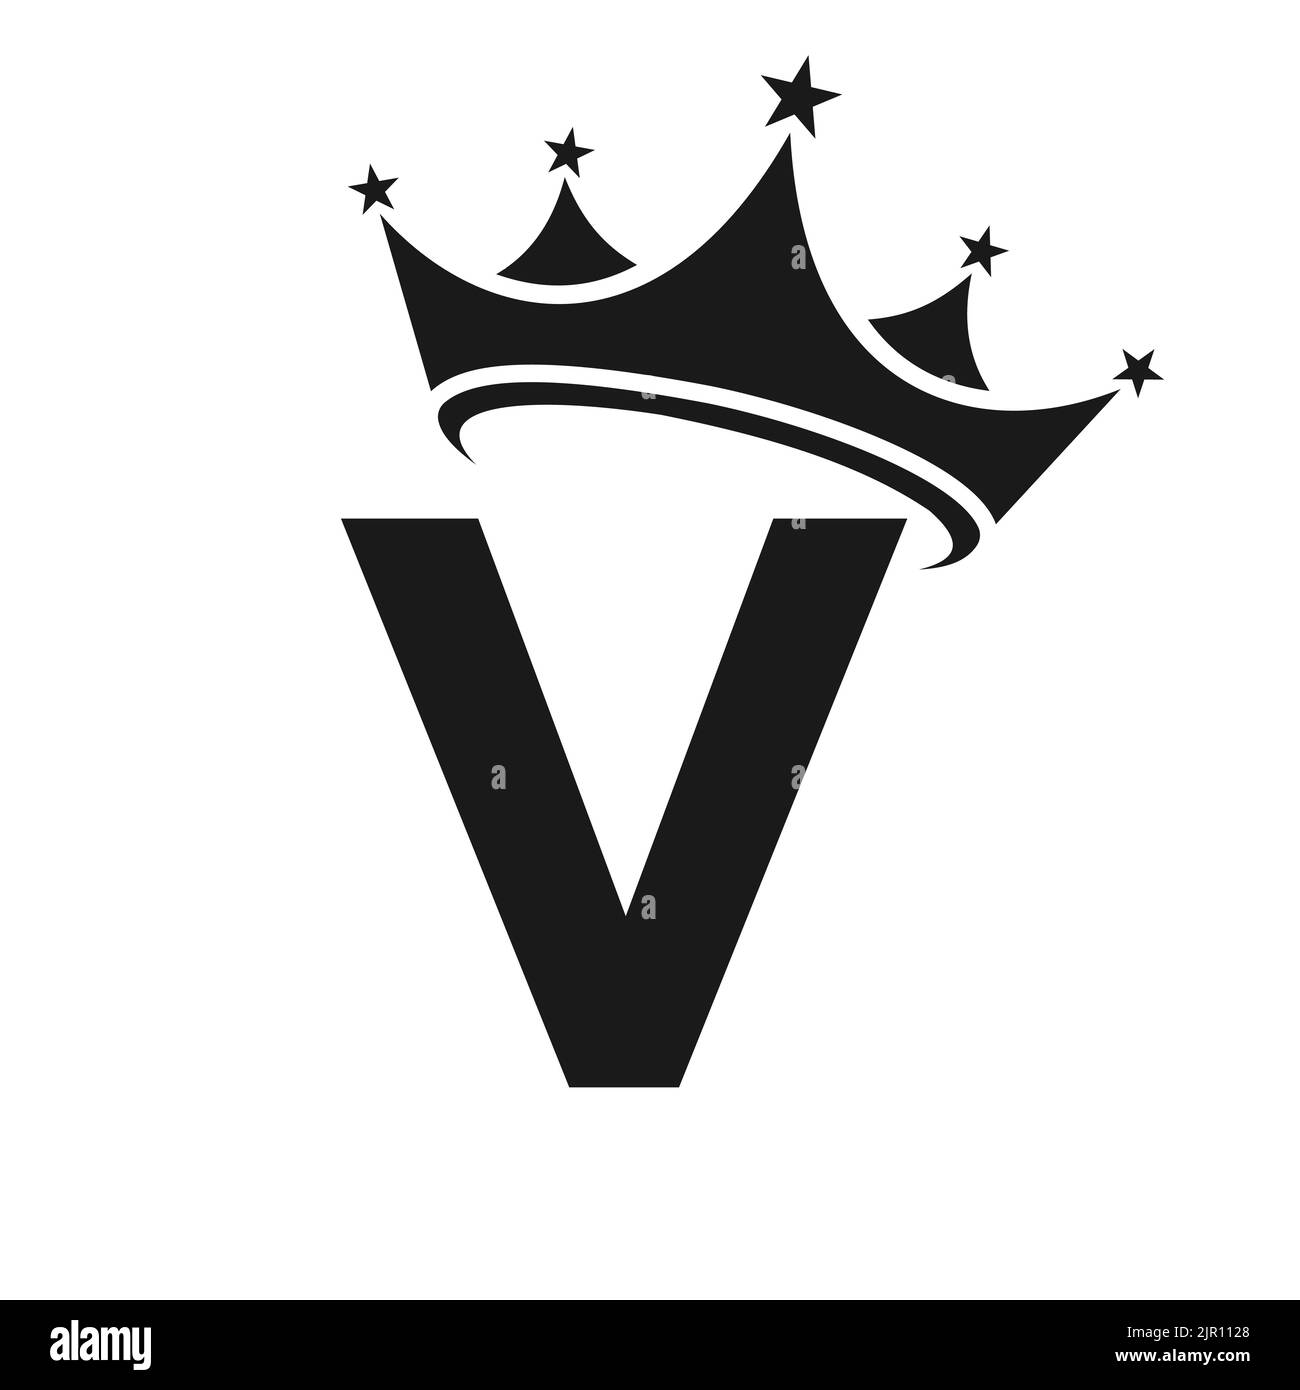 Queen of king v Stock Vector Images - Alamy